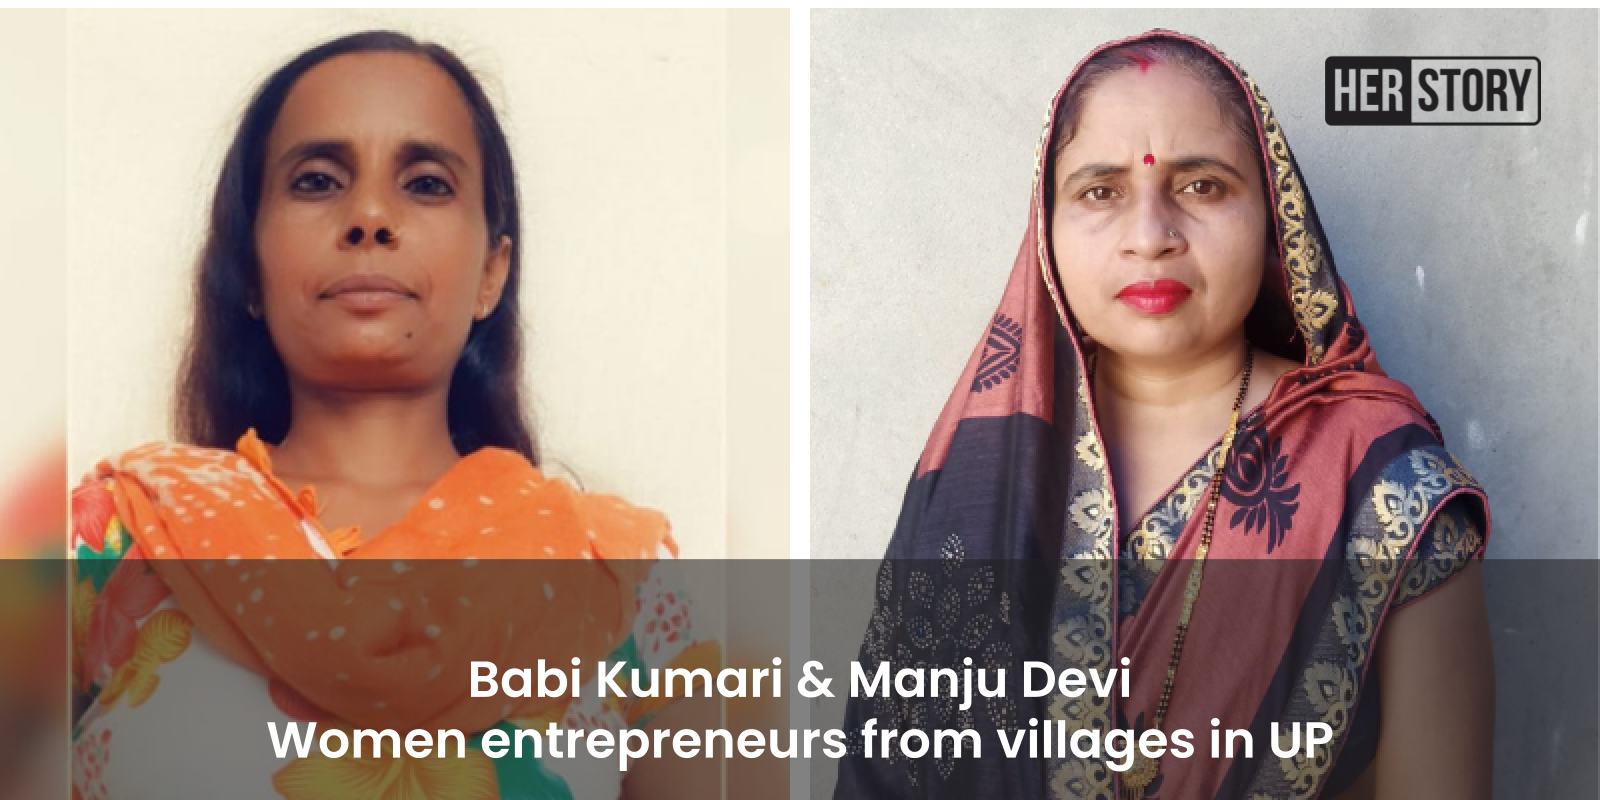 These women entrepreneurs from UP villages want to expand their small businesses by going online

